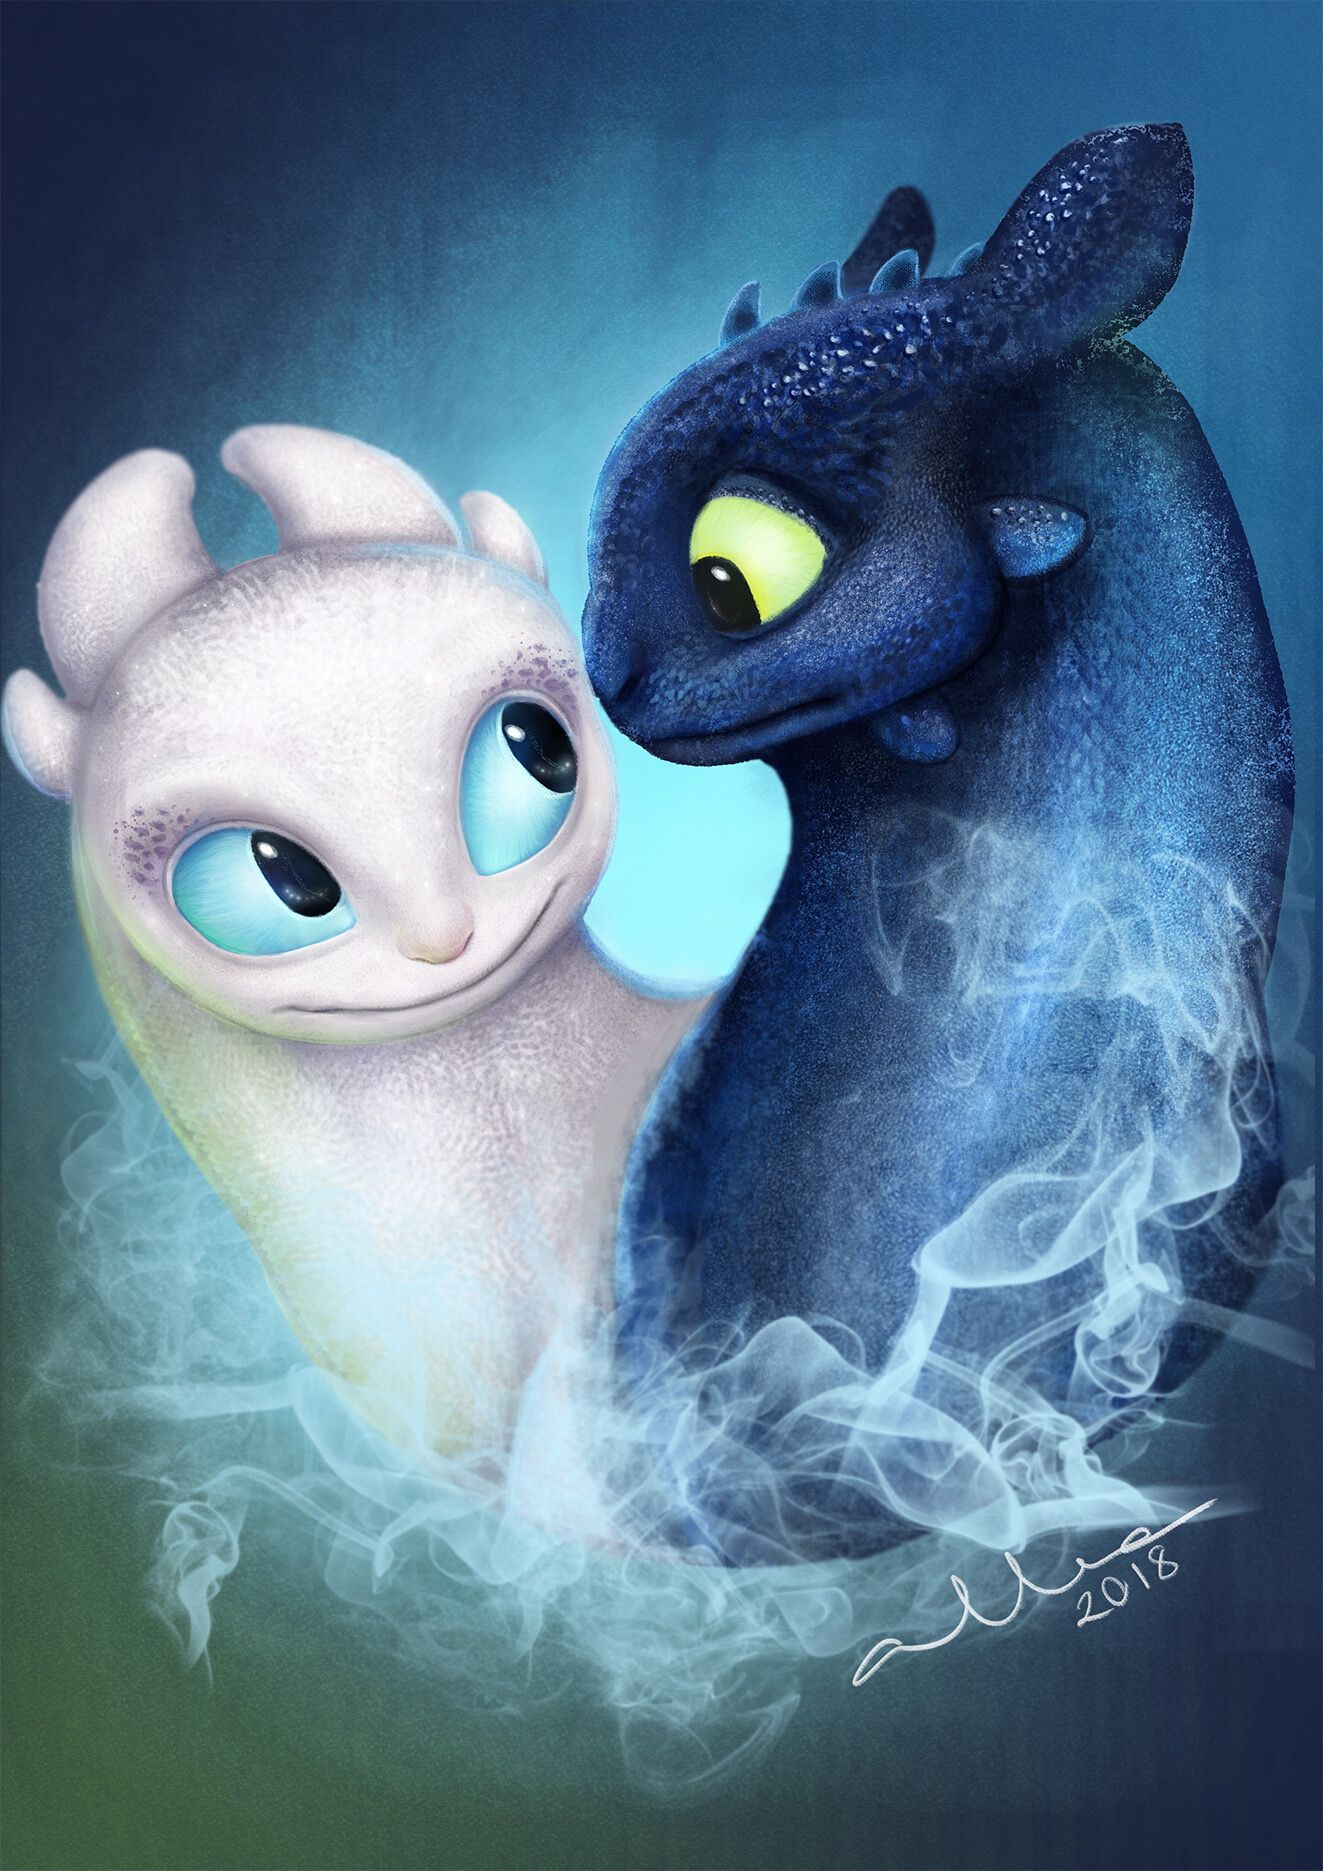 Toothless the Night Fury and his mate, Light Fury. Dragon picture, Cute fantasy creatures, Cute disney drawings